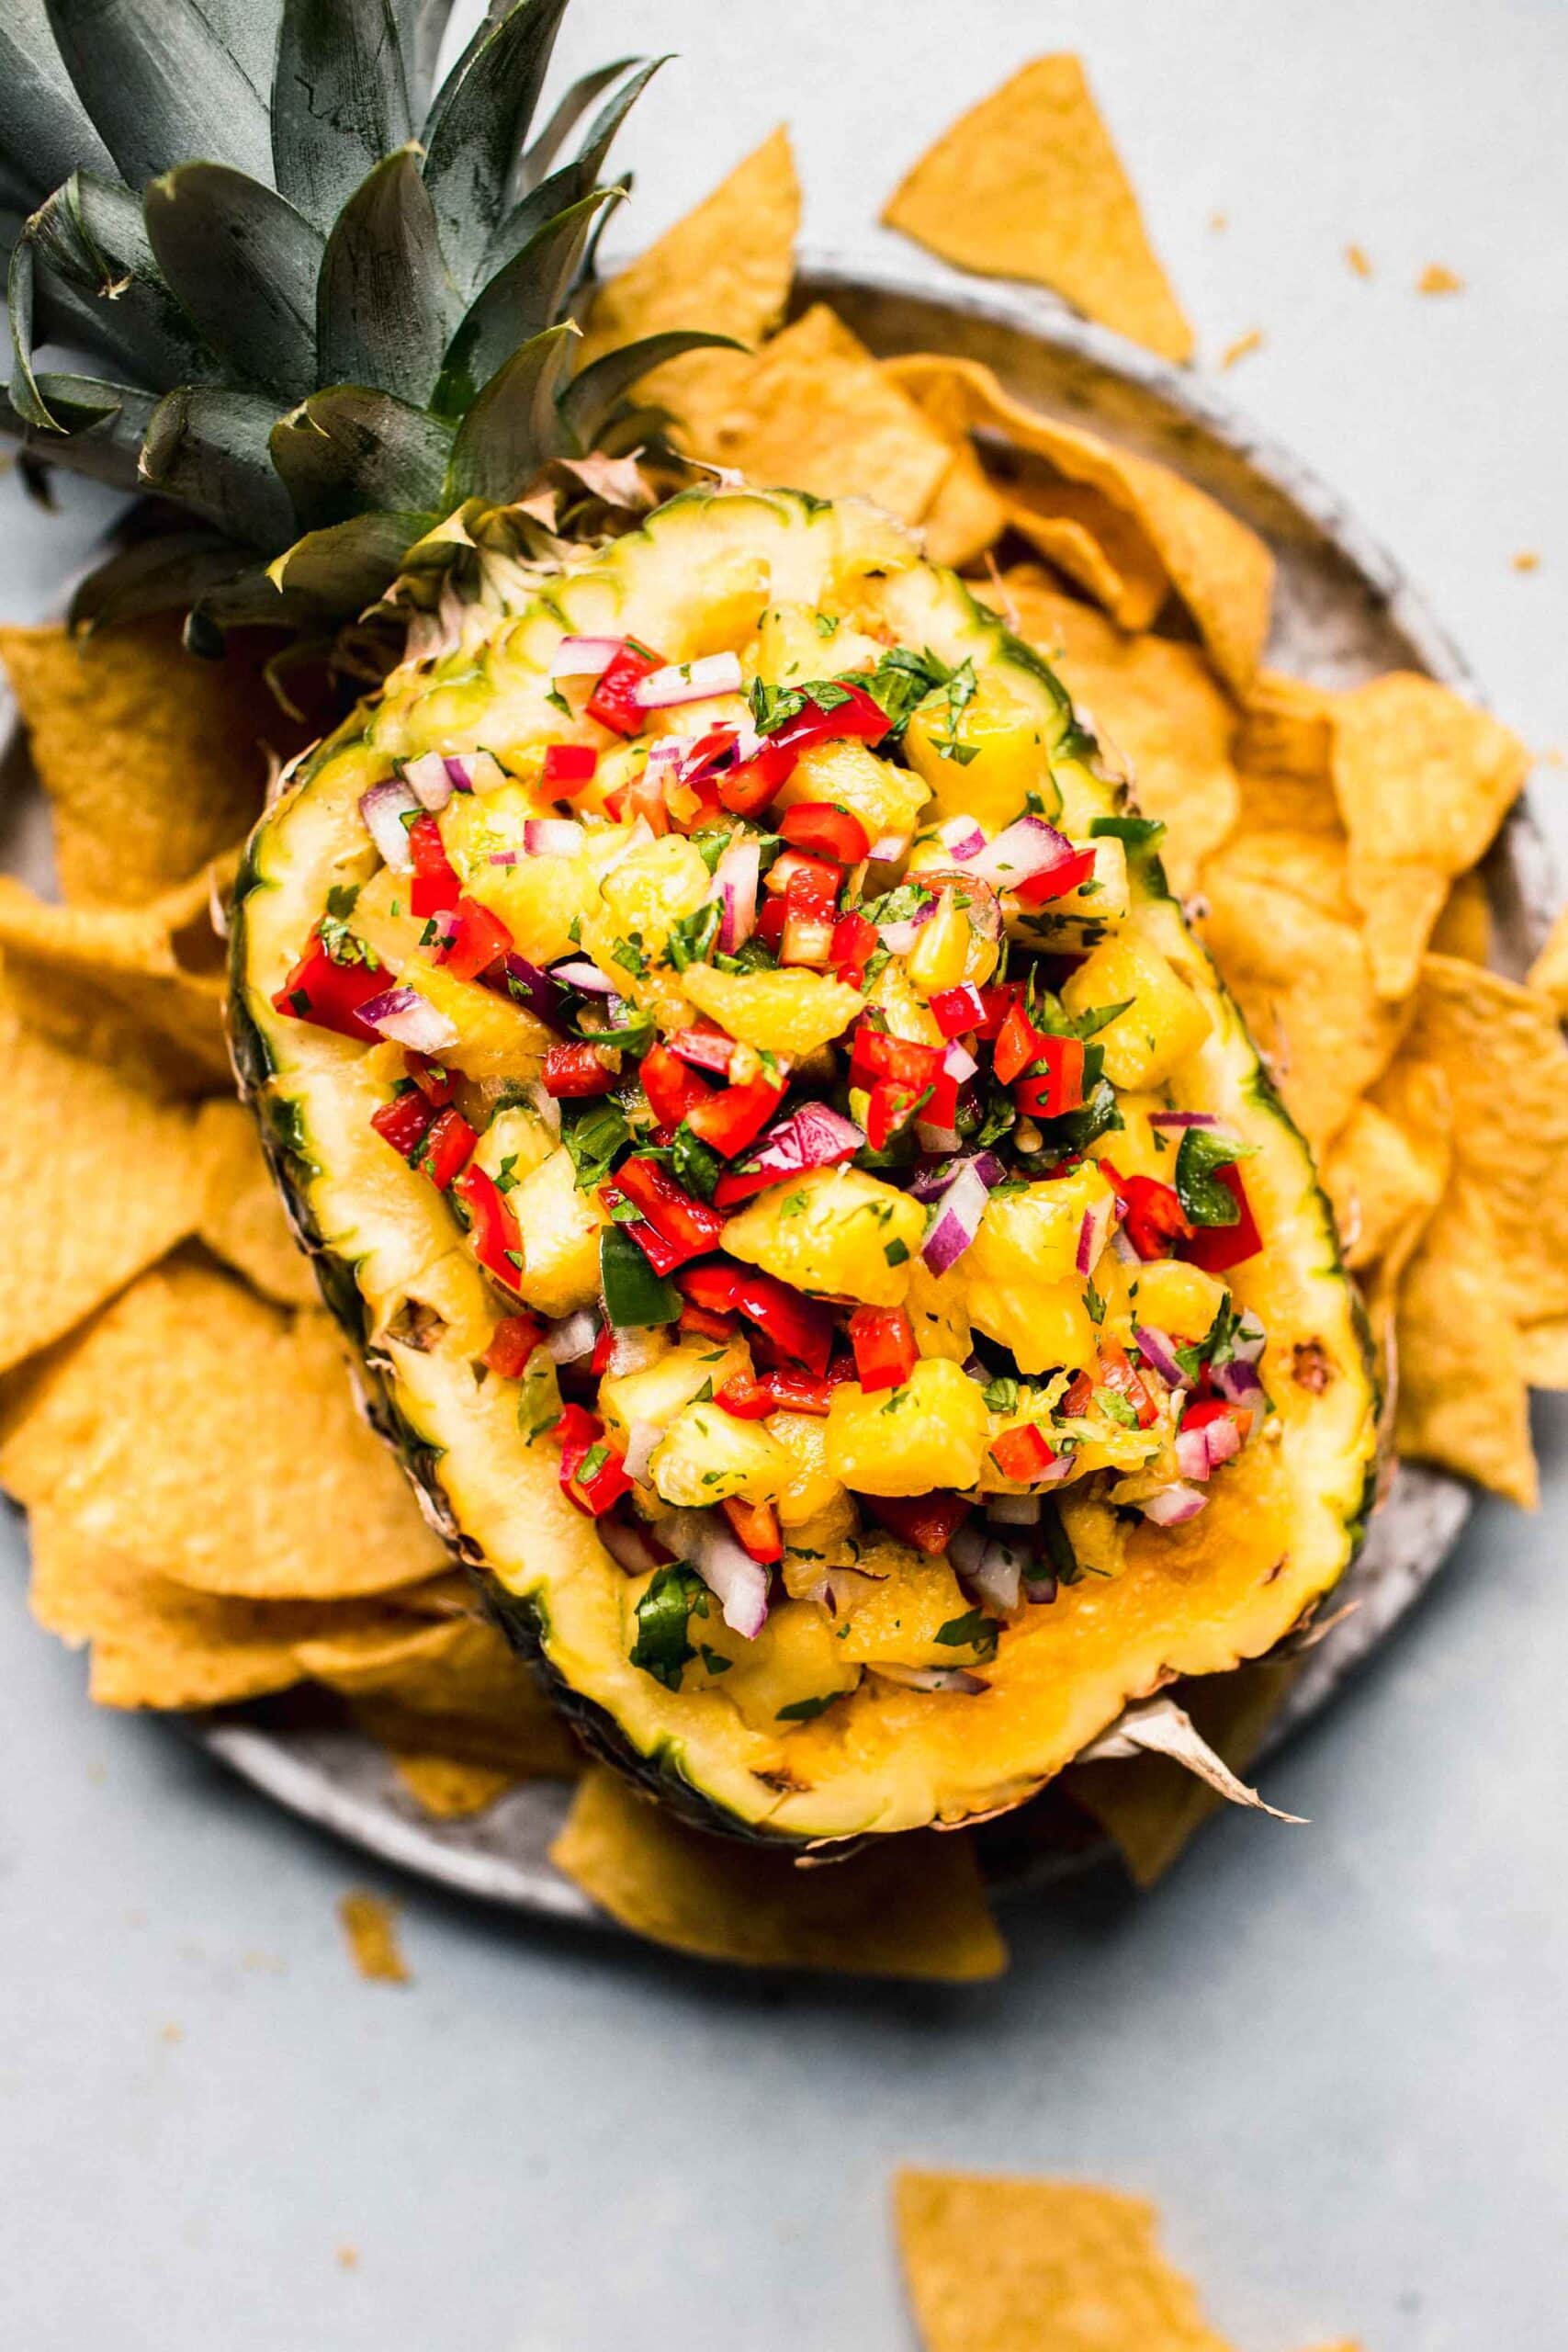 Pineapple salsa served in pineapple bowl next to chips.